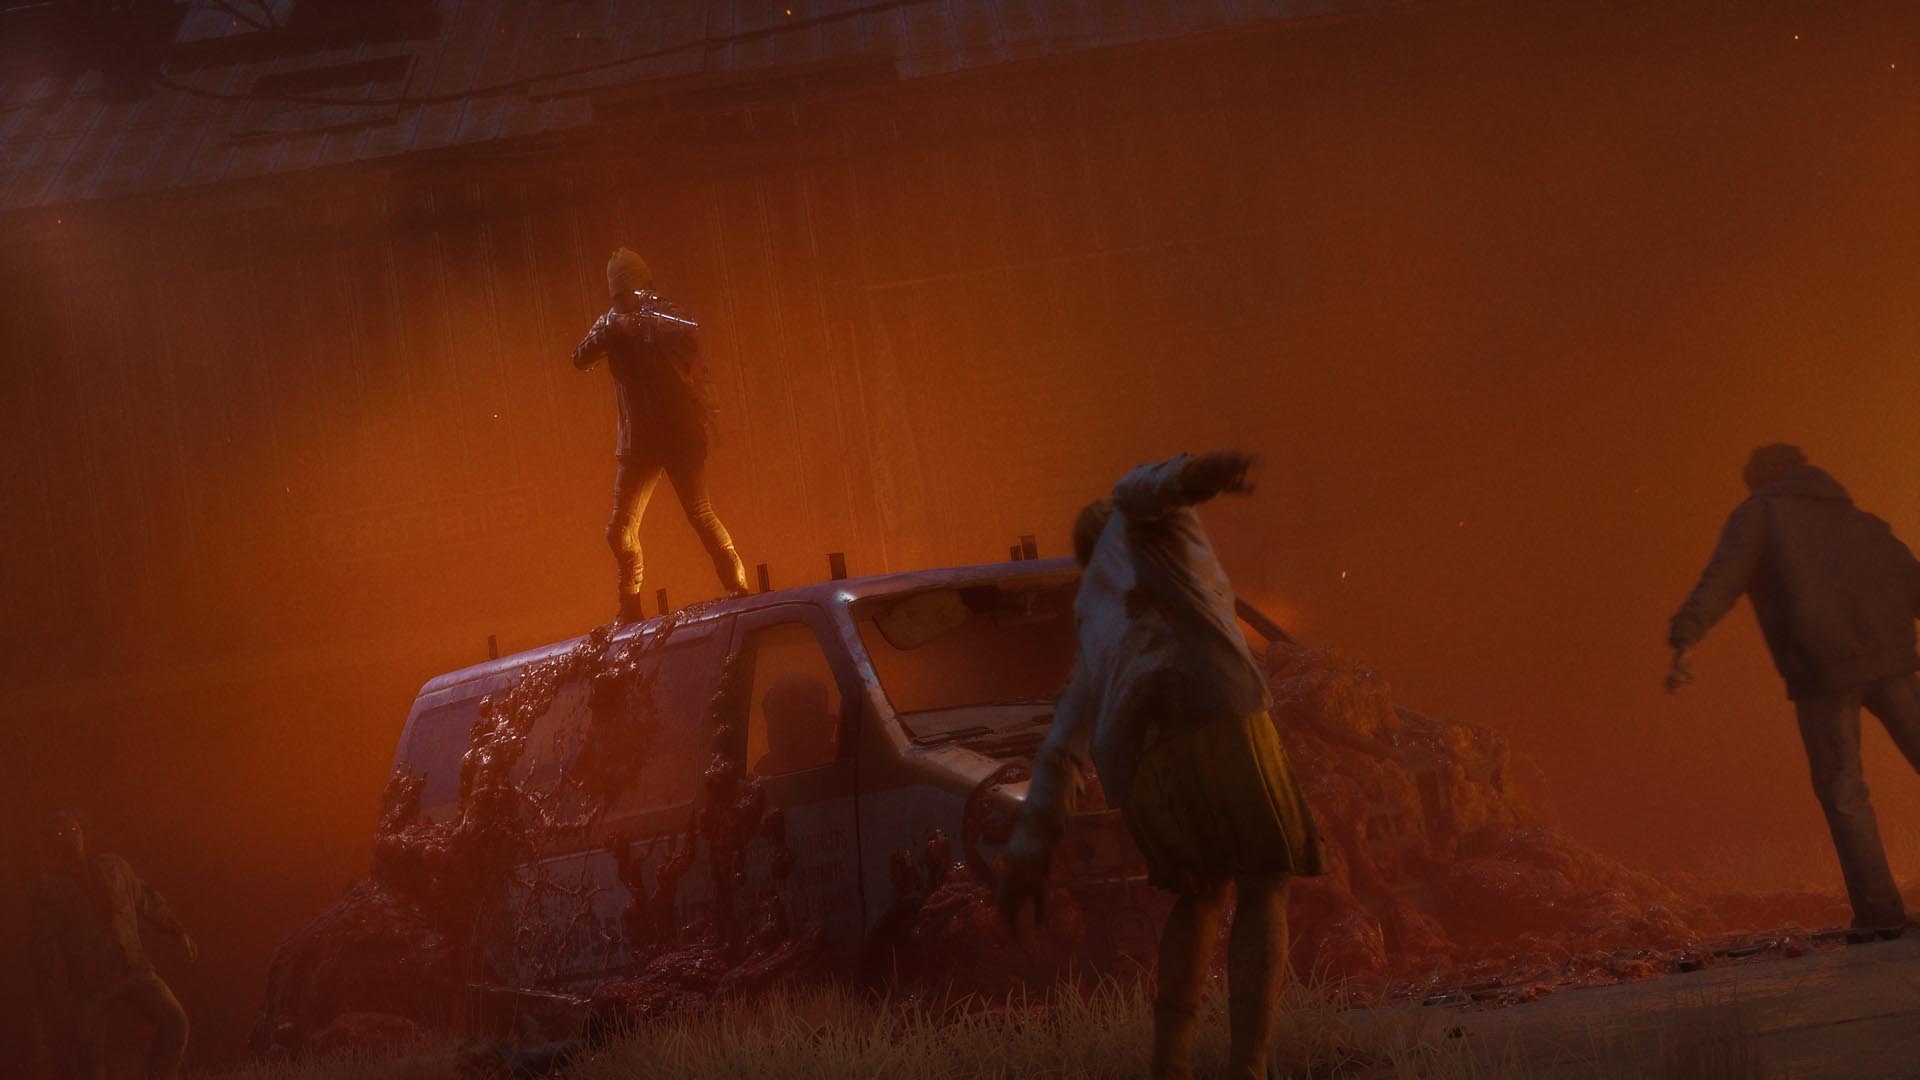 State of decay 3 3 1 4